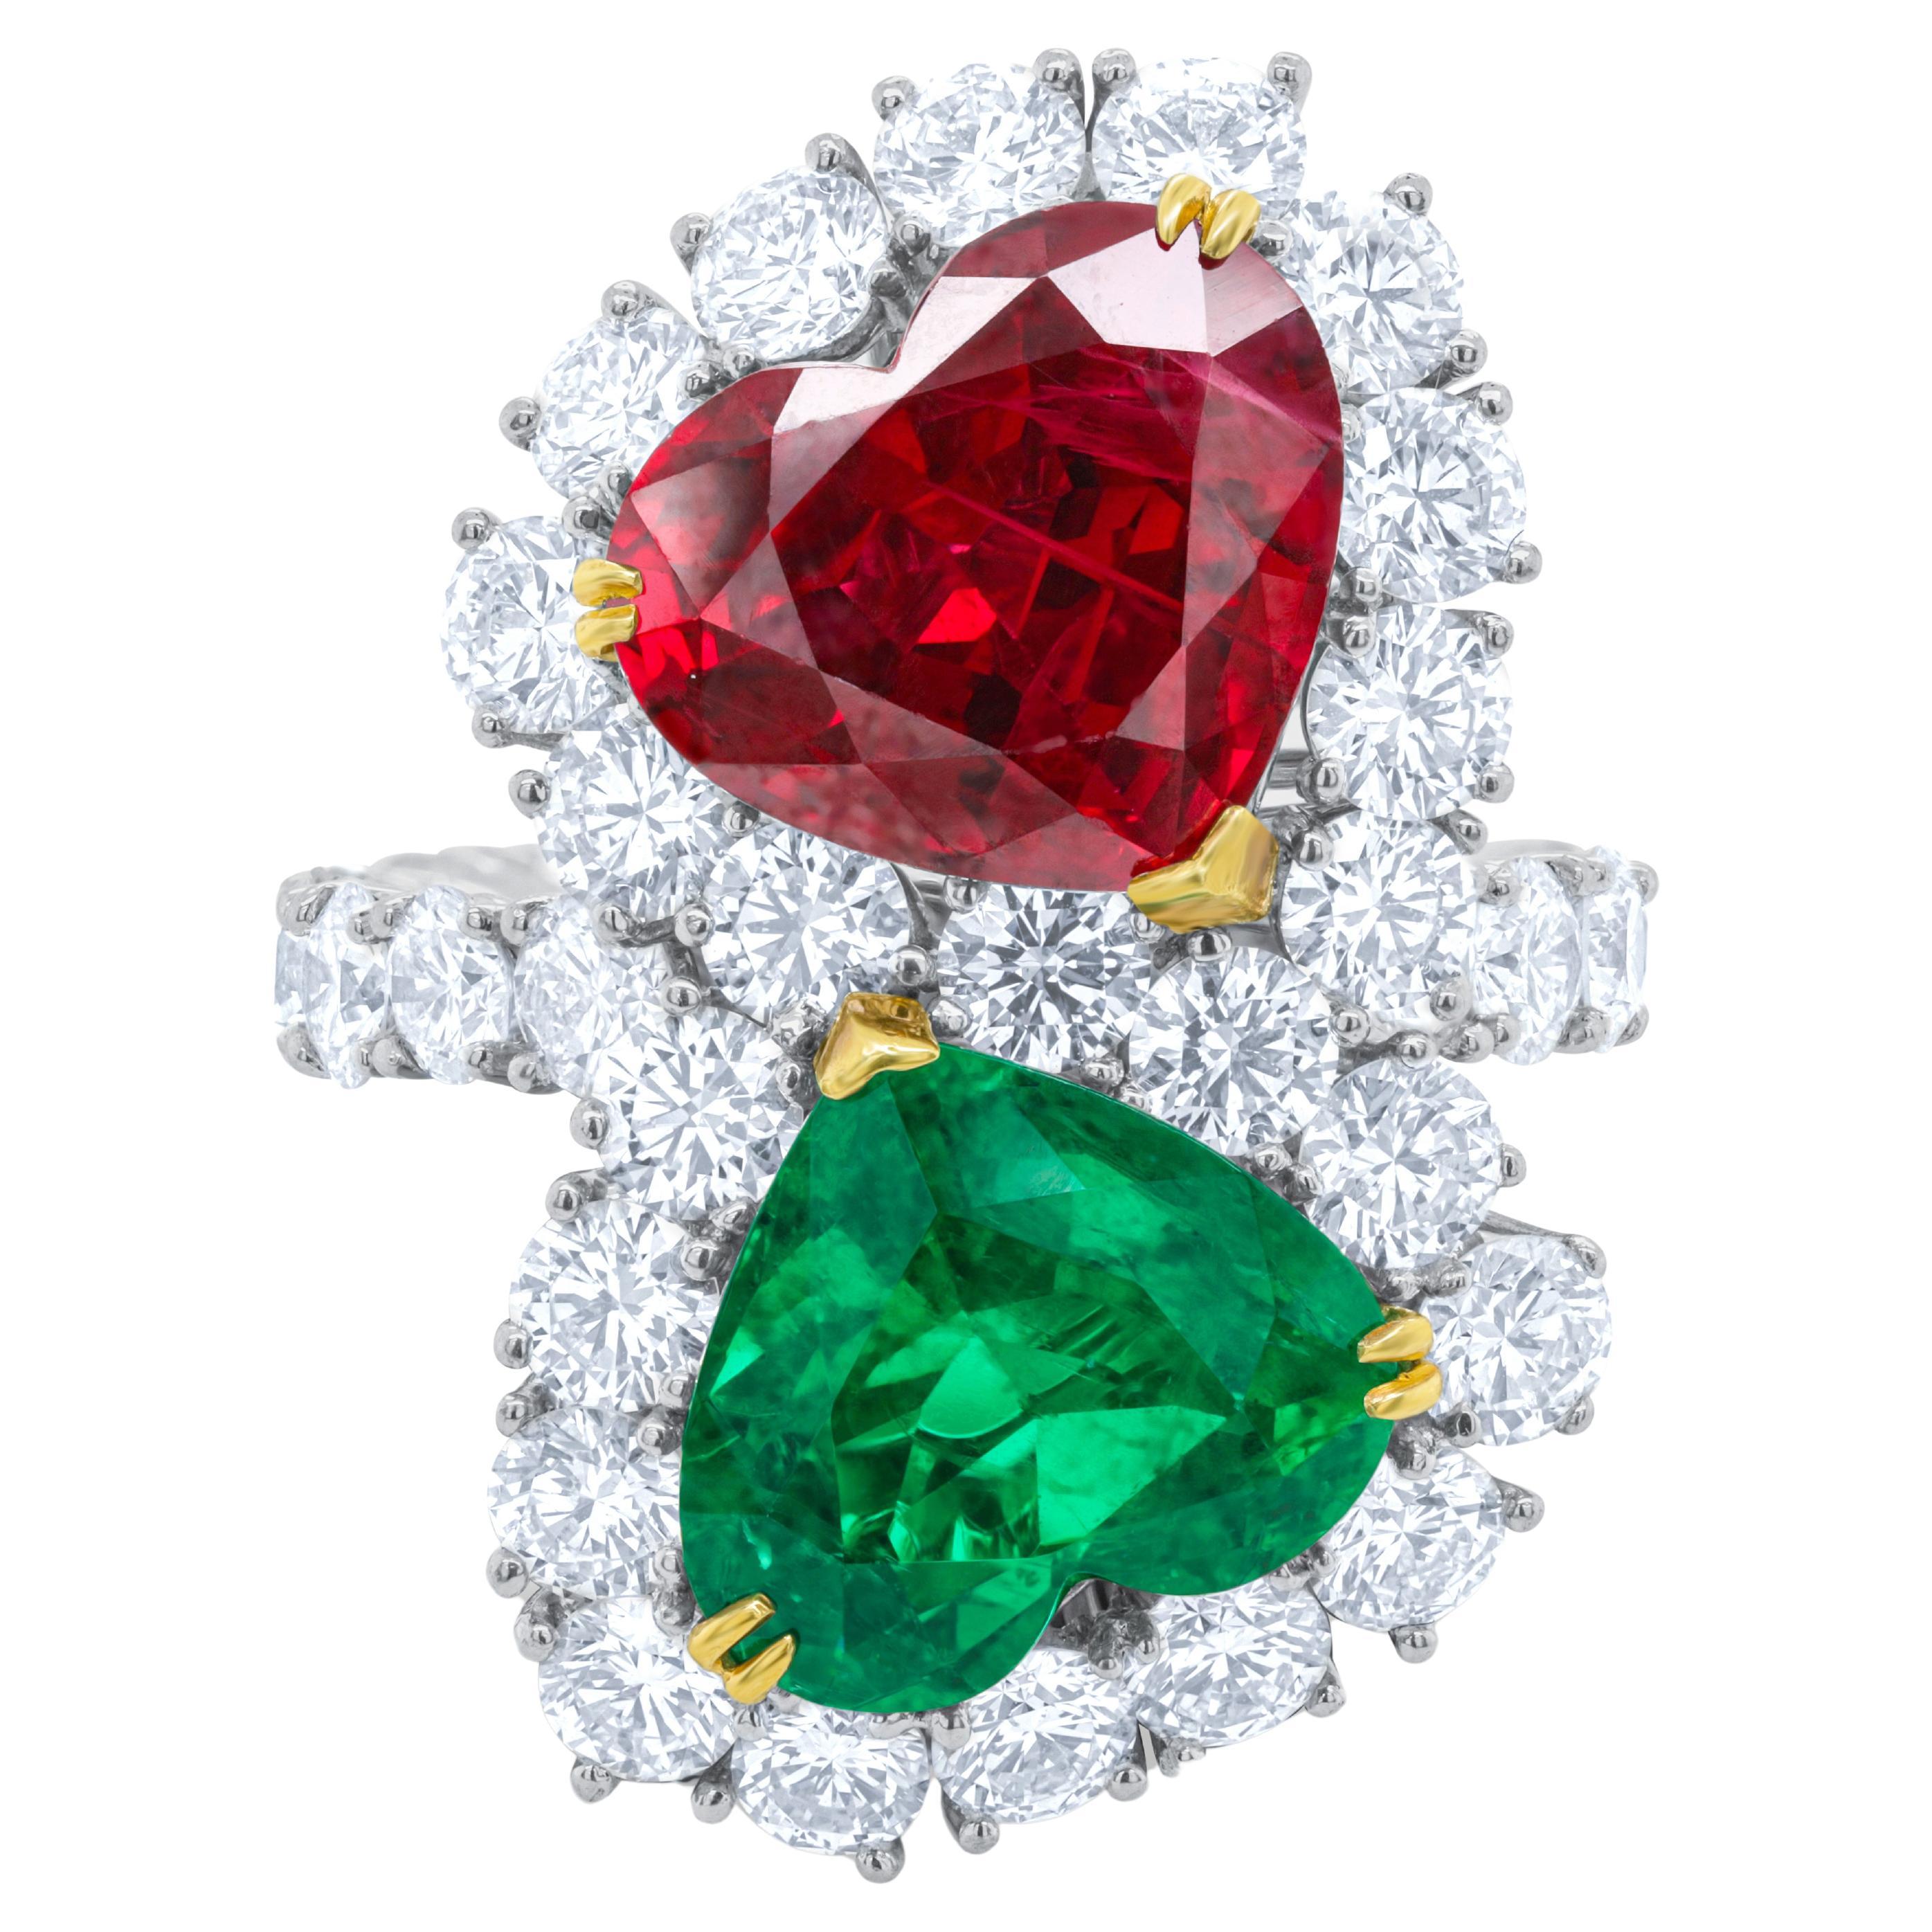 Diana M. Platinum diamond ring 11.05 cts tw of heartshaped ruby and emerald 